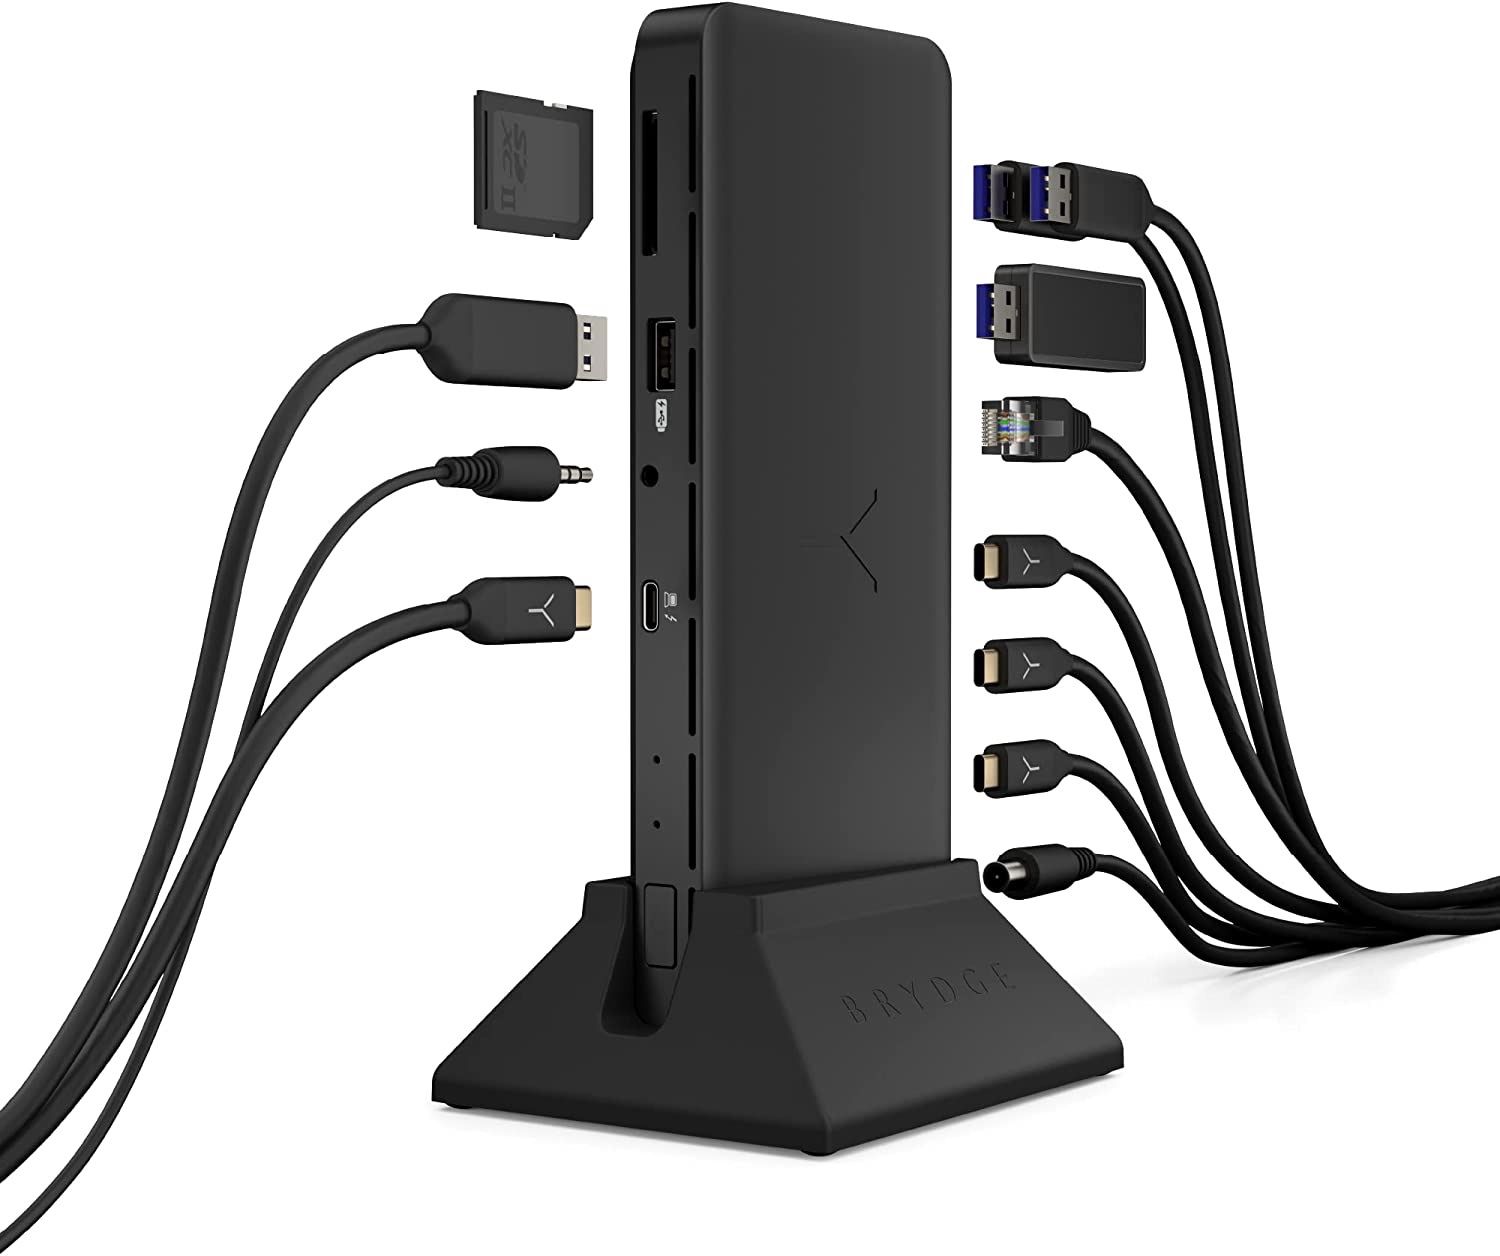 Black Brydge Stone TB4 standing vertically on its stand with various connectors shown next to their compatible ports